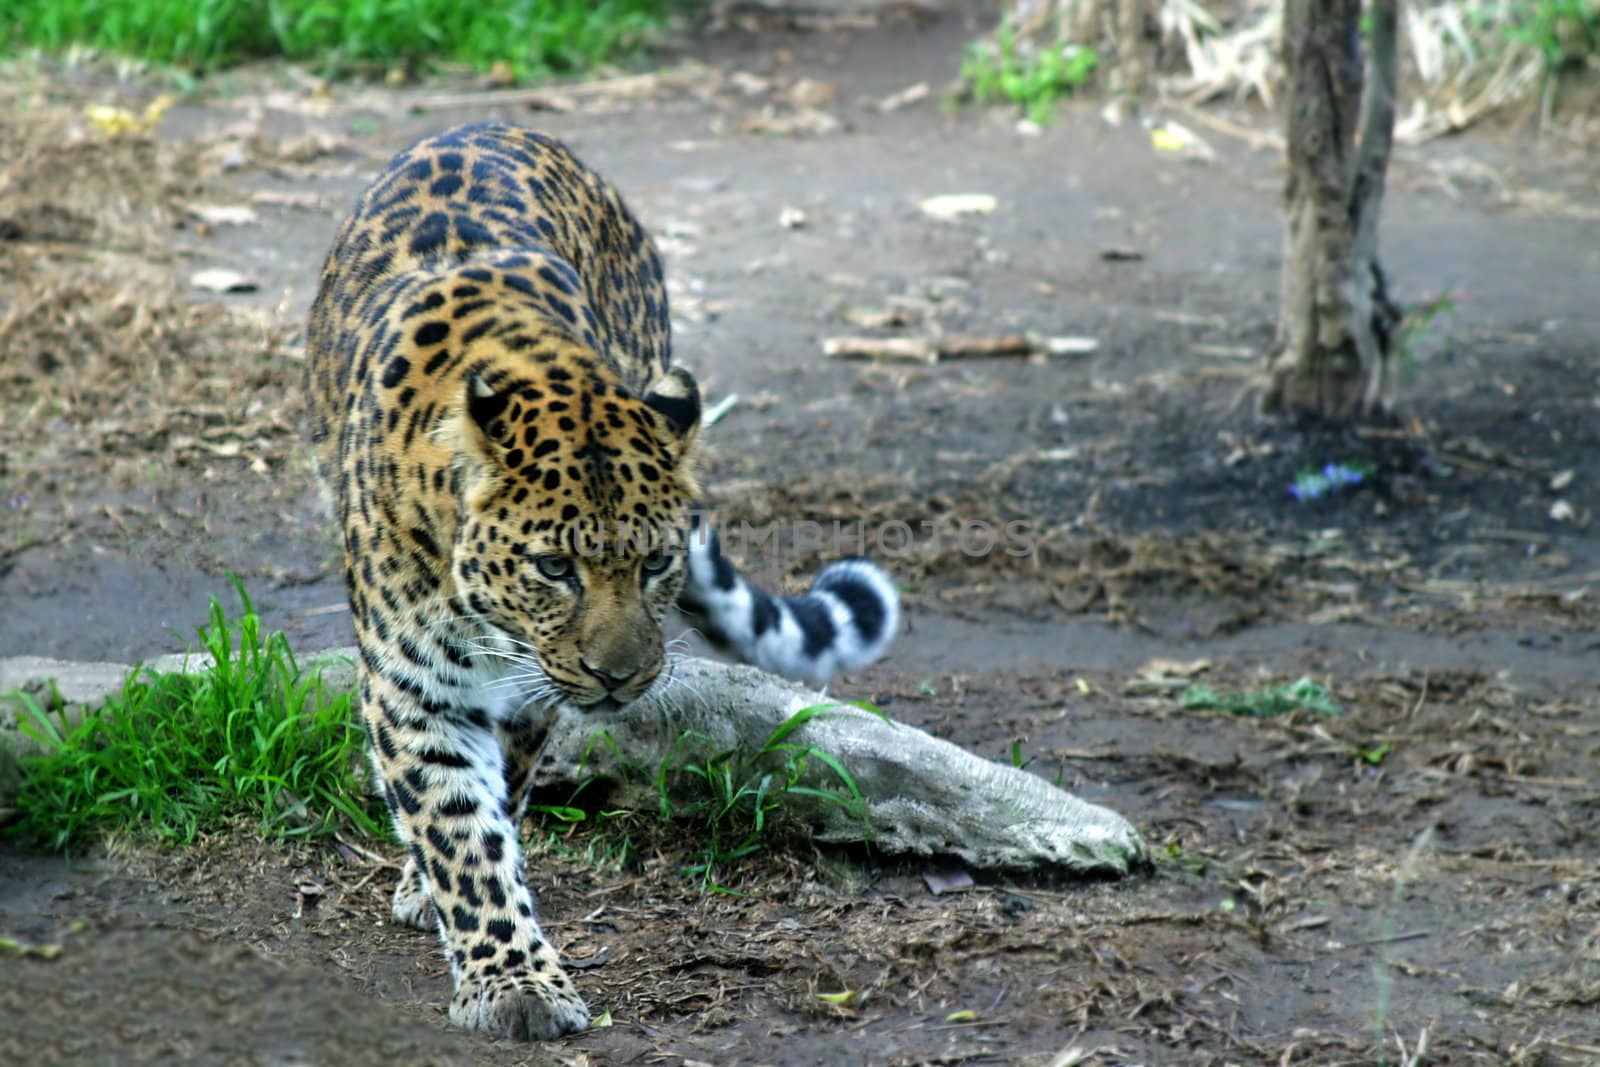 The critically endangered Amur Leopard is the one of the rarest subspecies of leopard in the world.